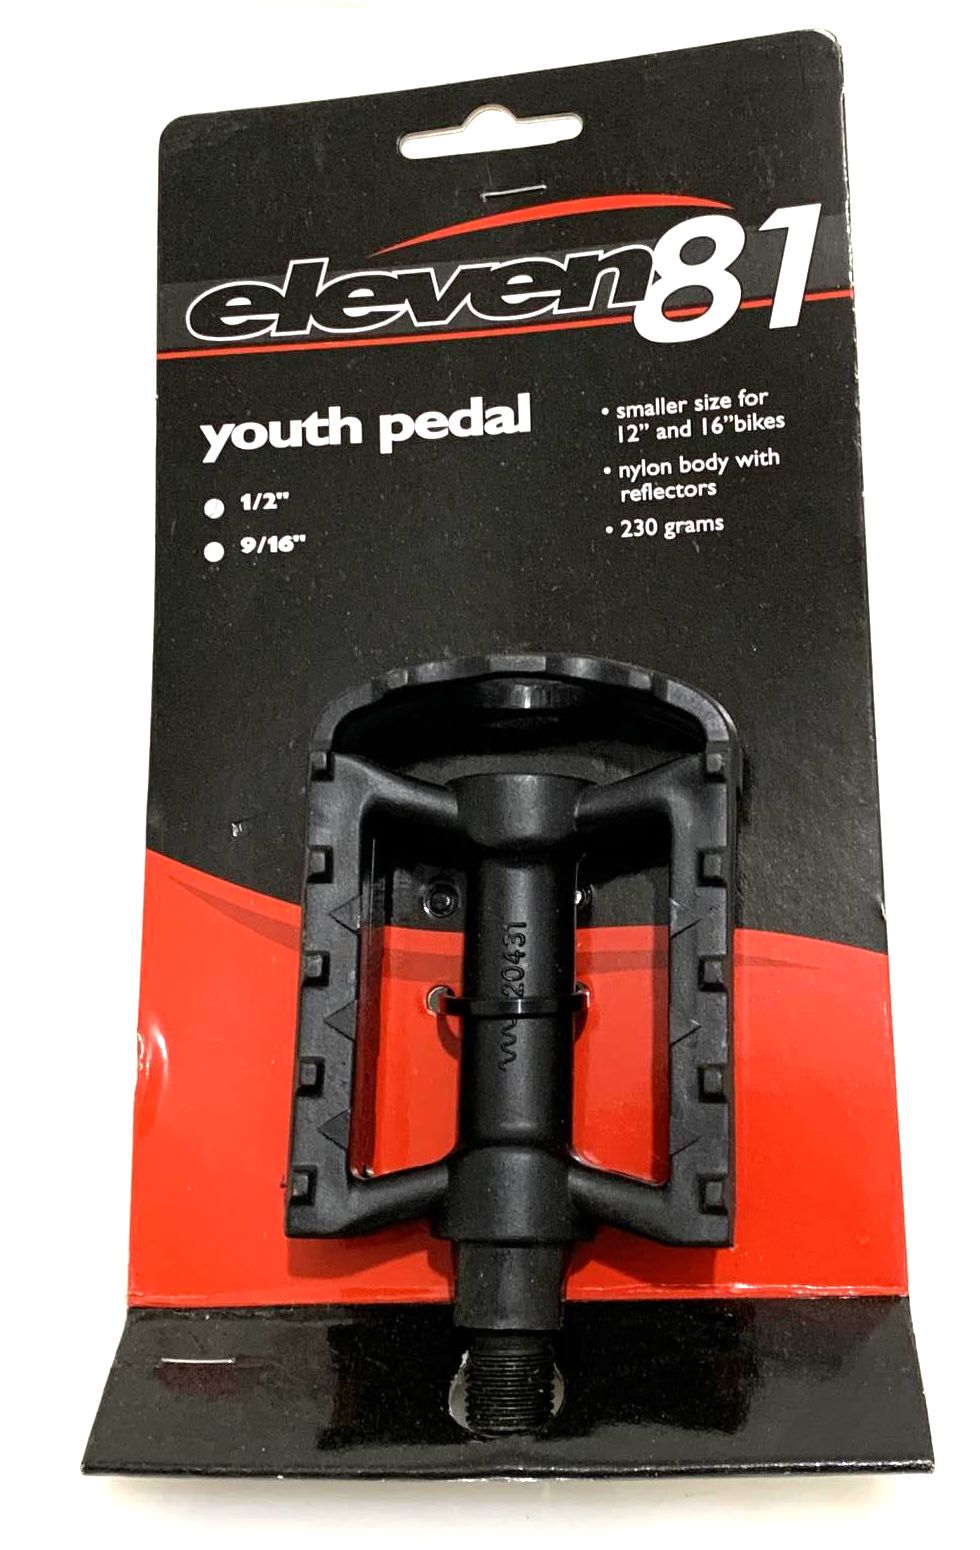 ELEVEN 81 YOUTH Bike Bicycle Cycle PEDAL 9/16" PEDALS NEW - Random Bike Parts